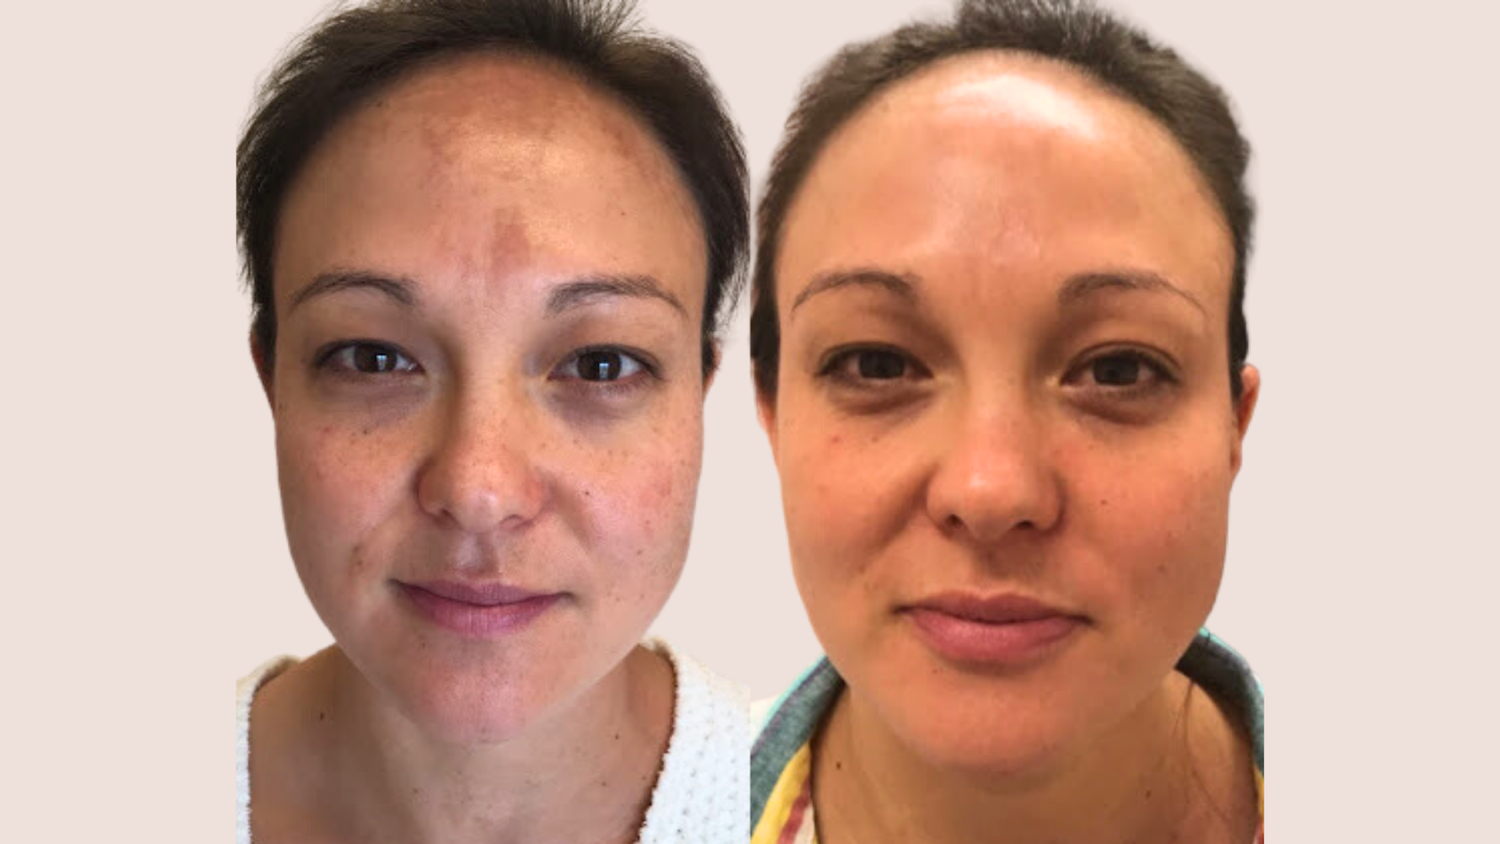 Before & After Peel Results